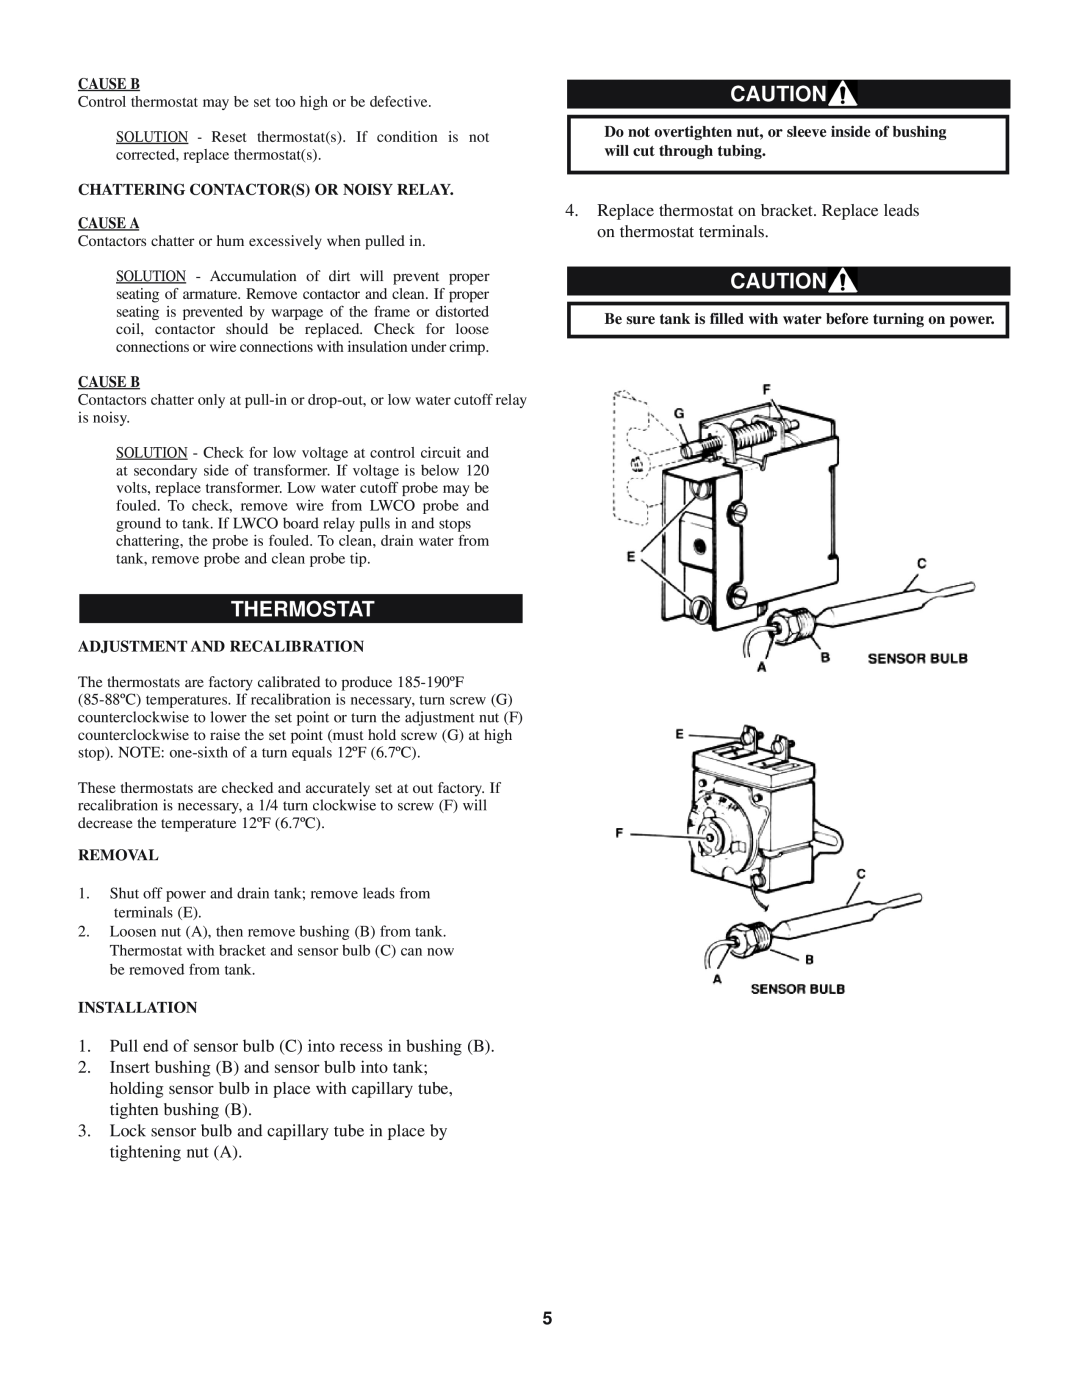 Lochinvar SSB-i & s--01 Thermostat, Cause B, Chattering Contactors Or Noisy Relay Cause A, Adjustment And Recalibration 